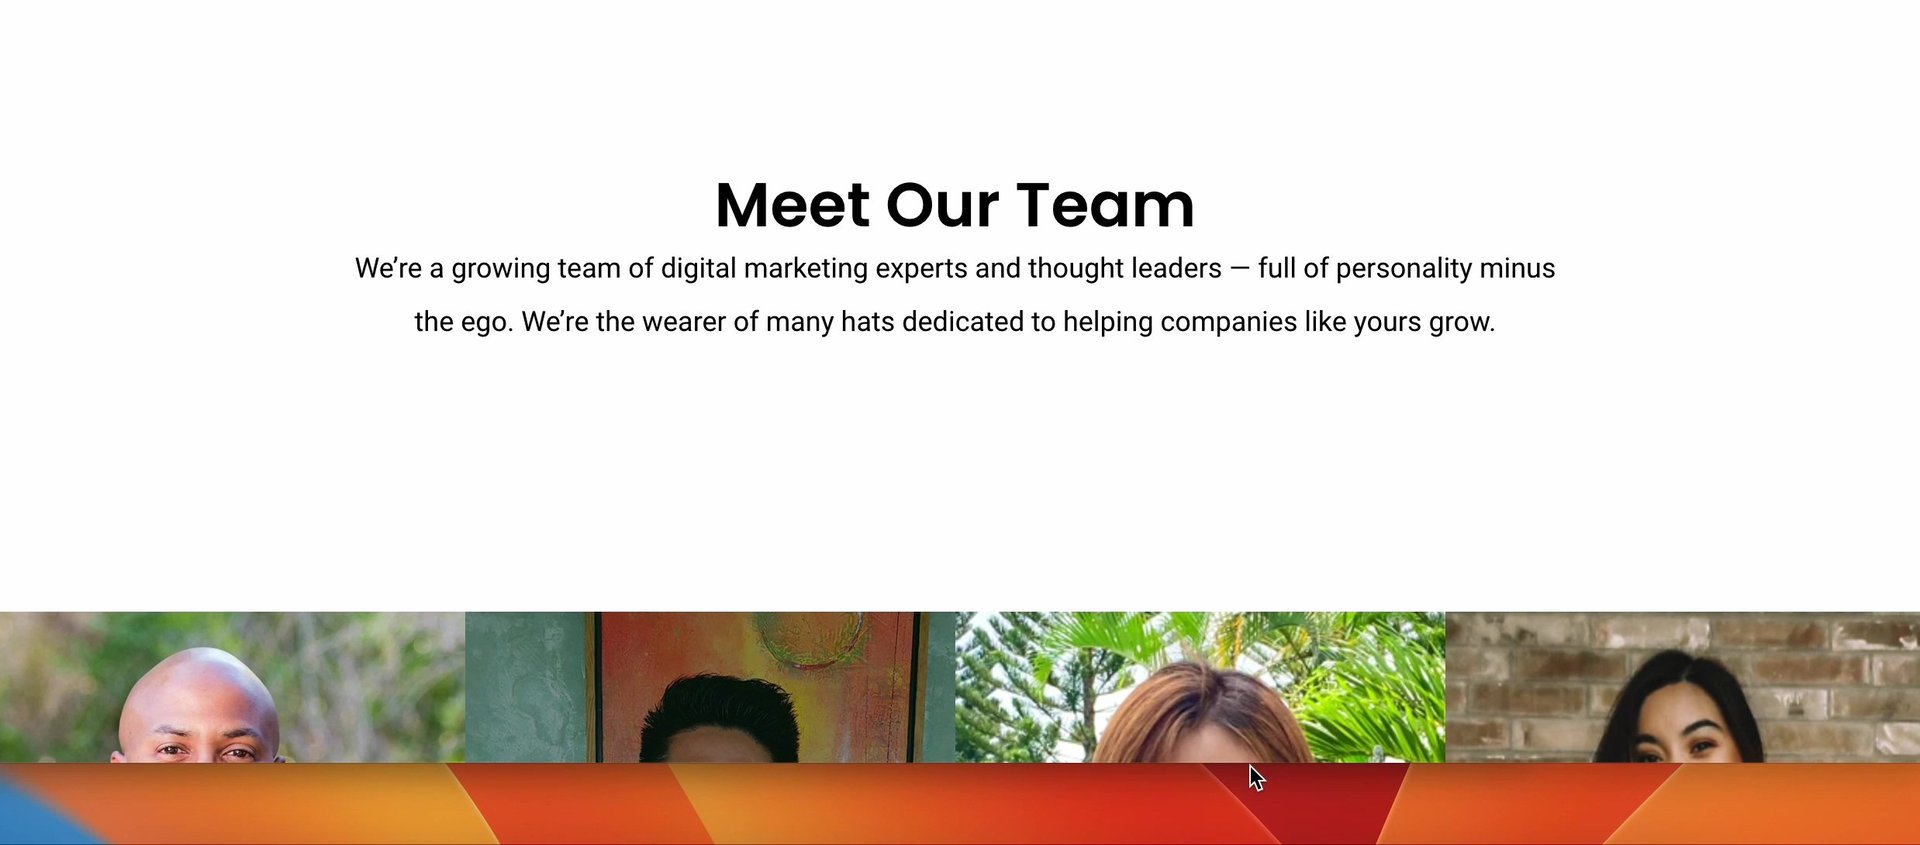 About us - Team